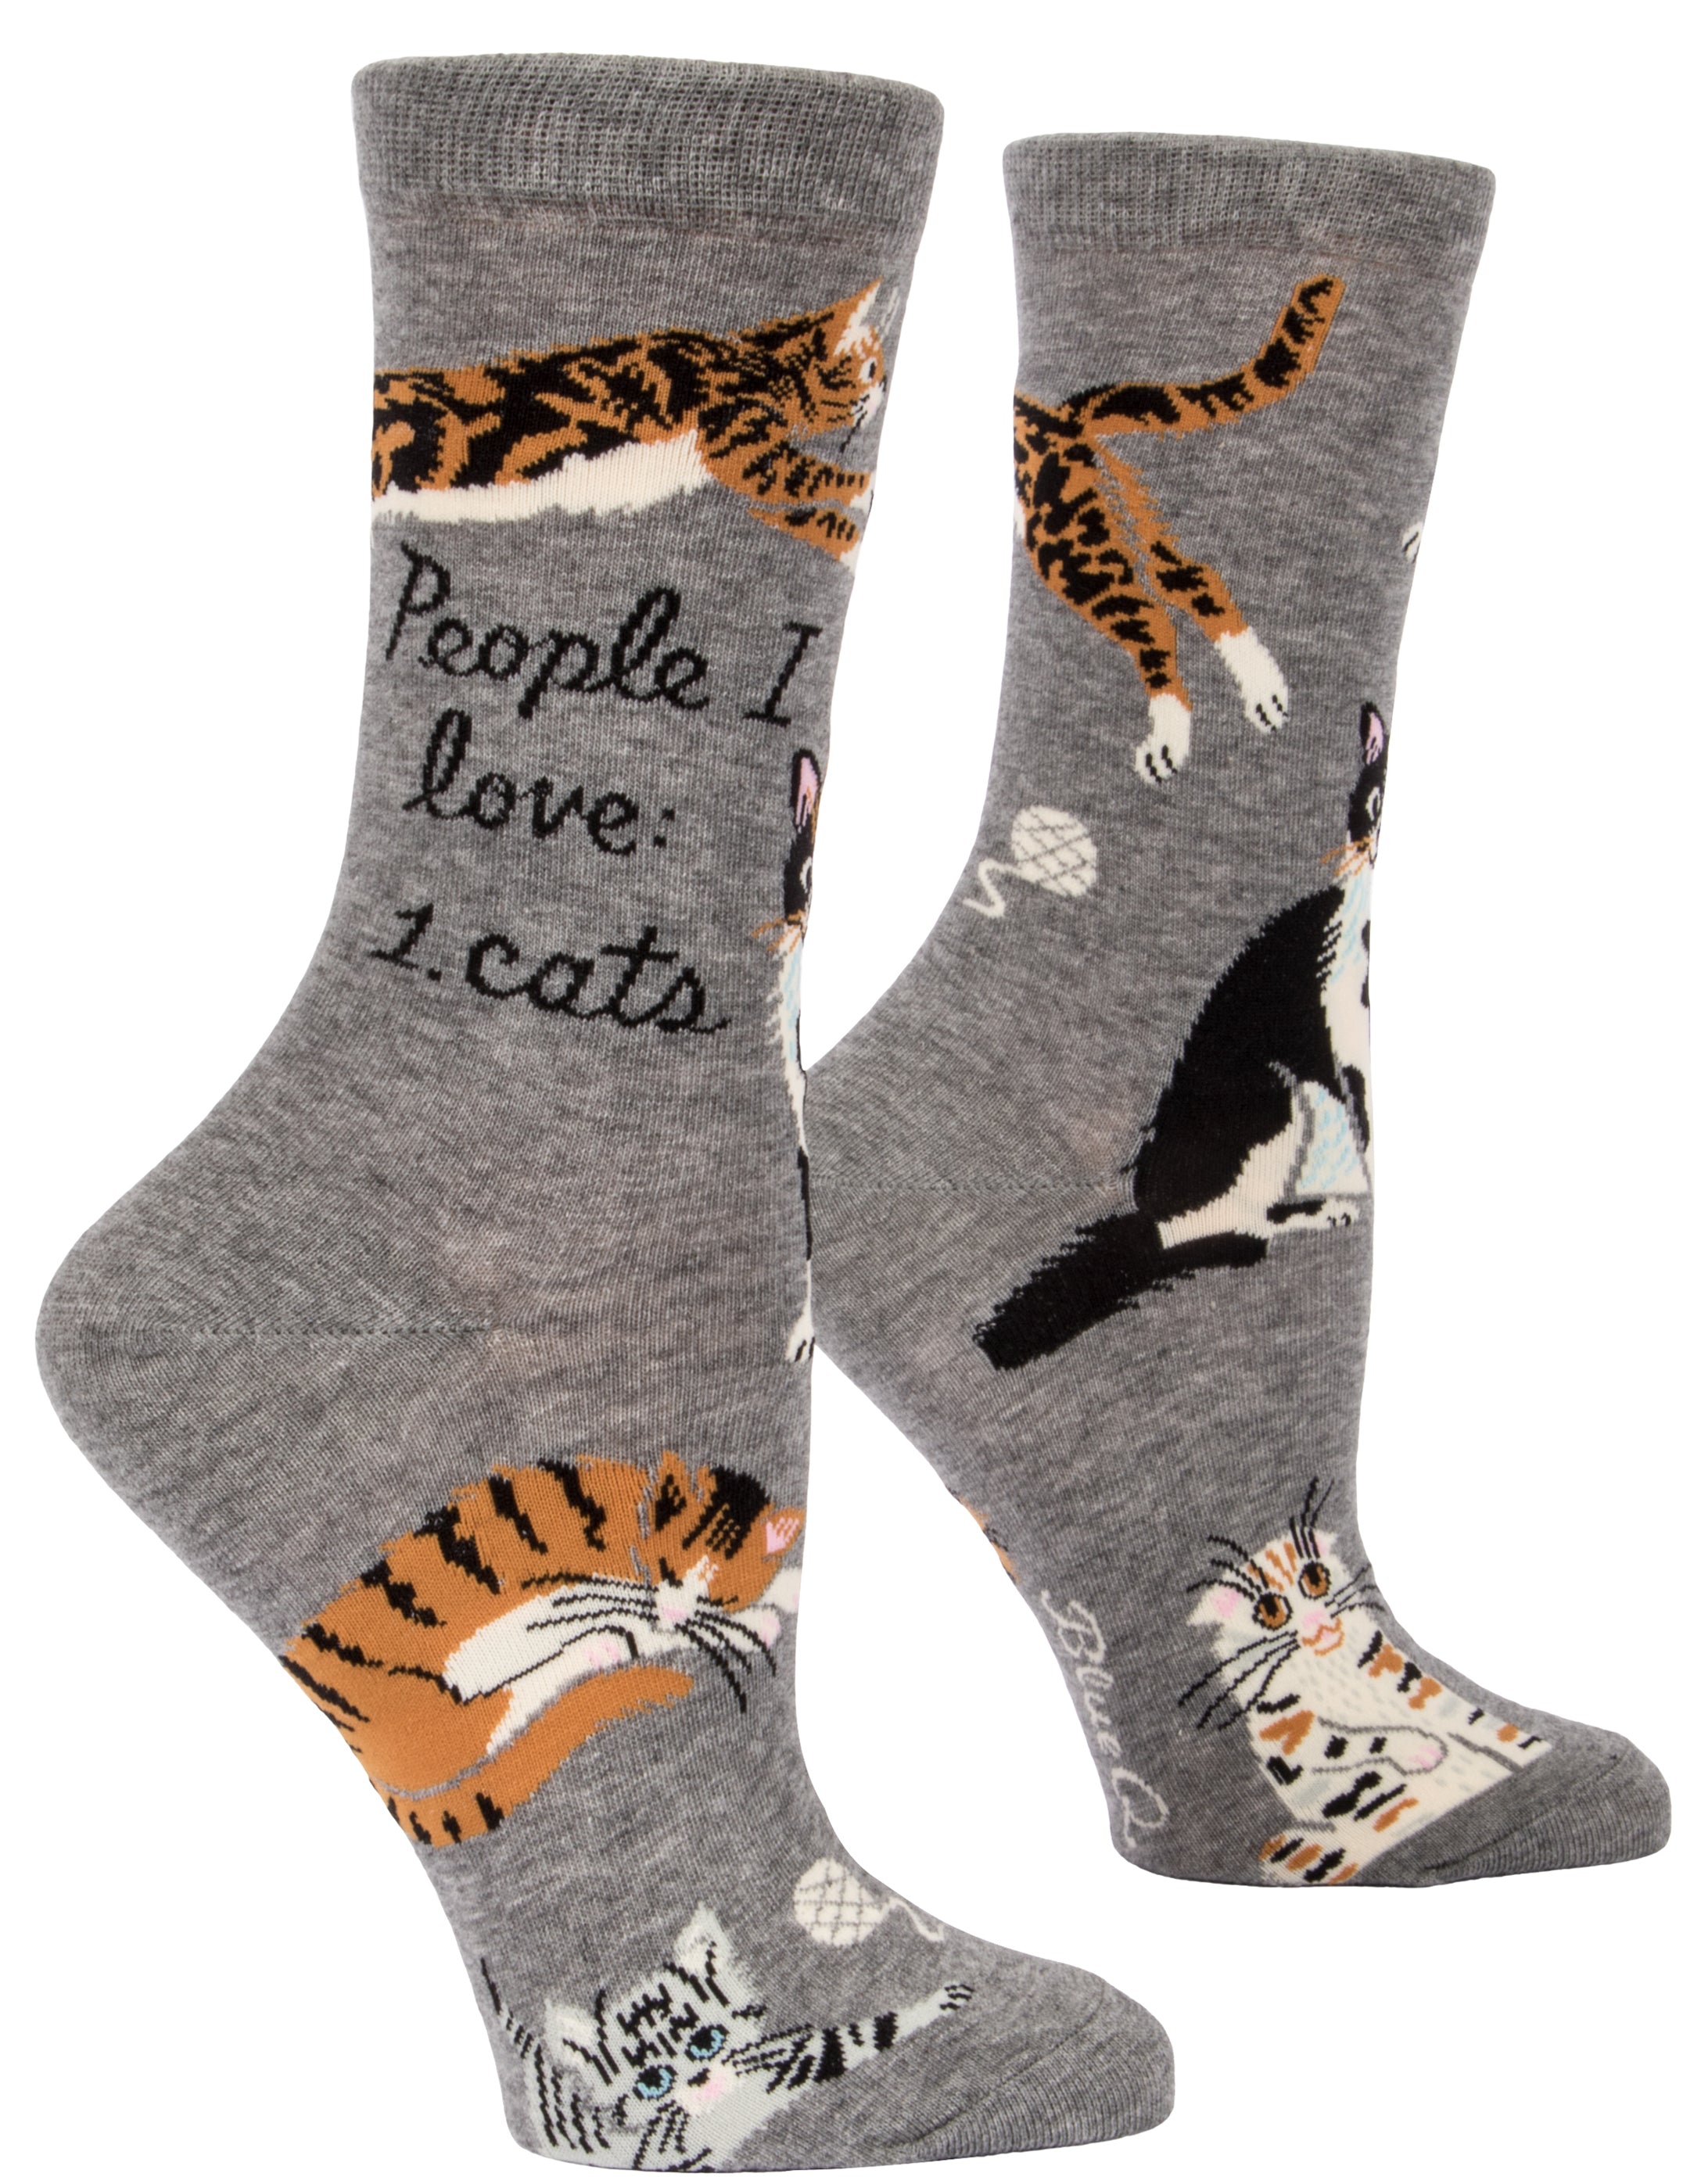 darker grey socks with a bunch of cats and balls of yarn on ankle it says people i love: 1.cats